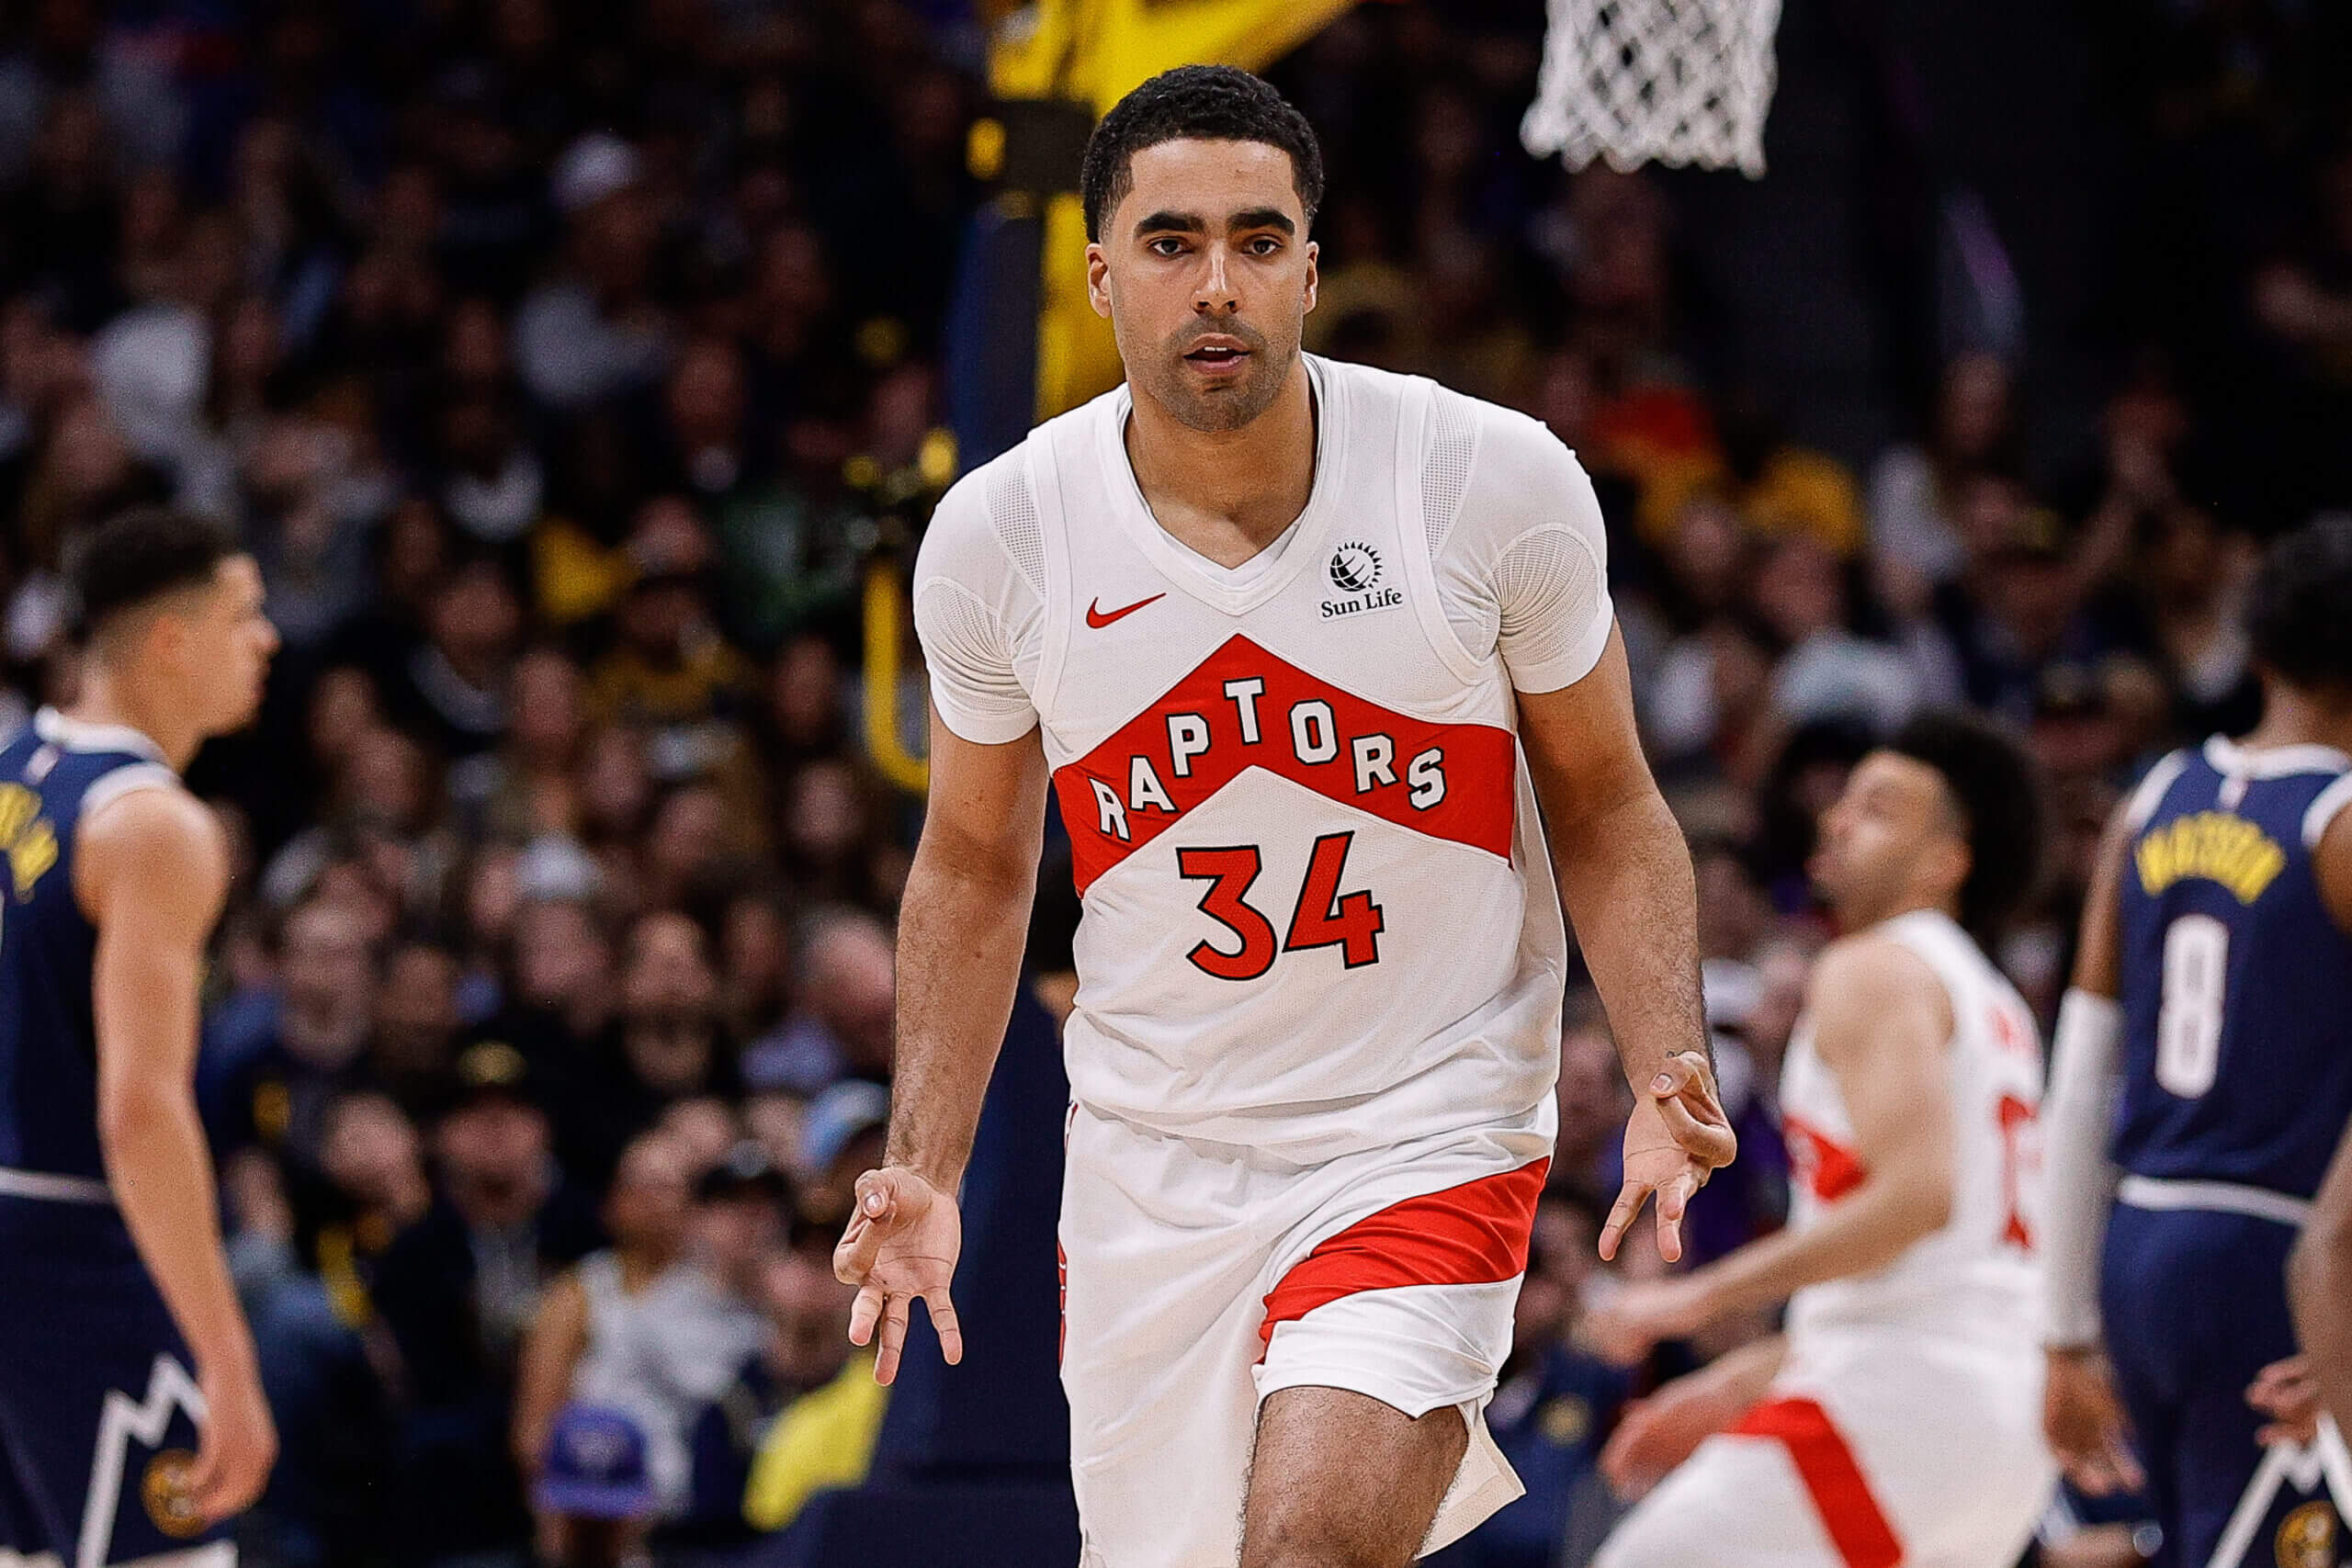 NBA’s banishment of Jontay Porter is about money and perception, not morality